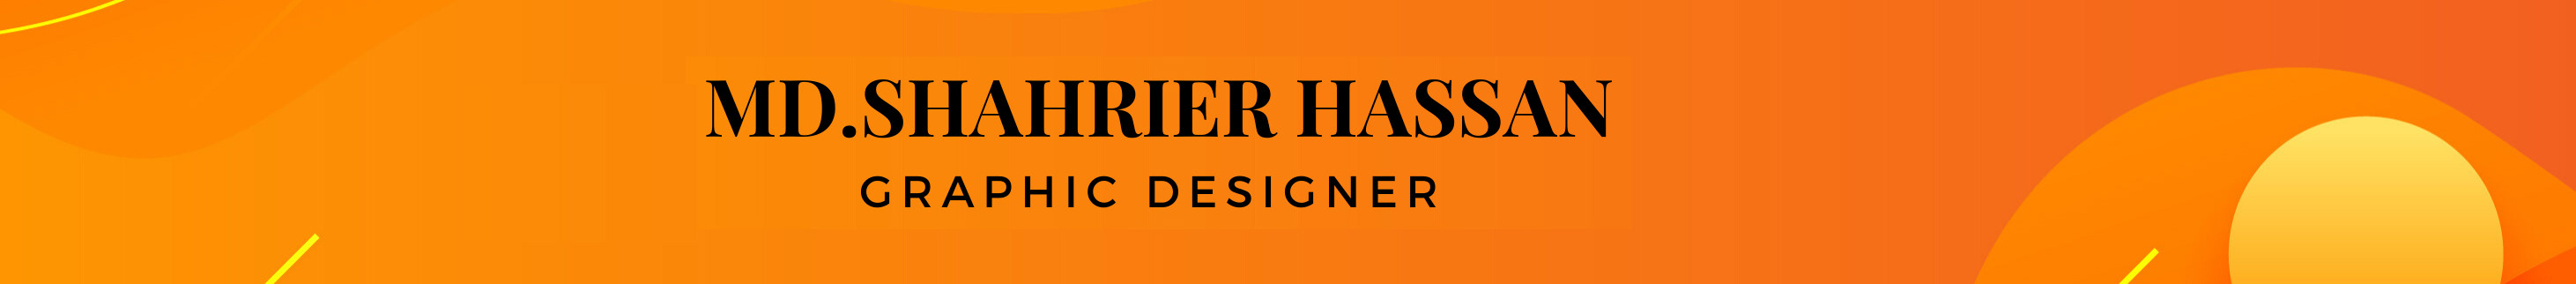 Md.Shahrier Hassan's profile banner